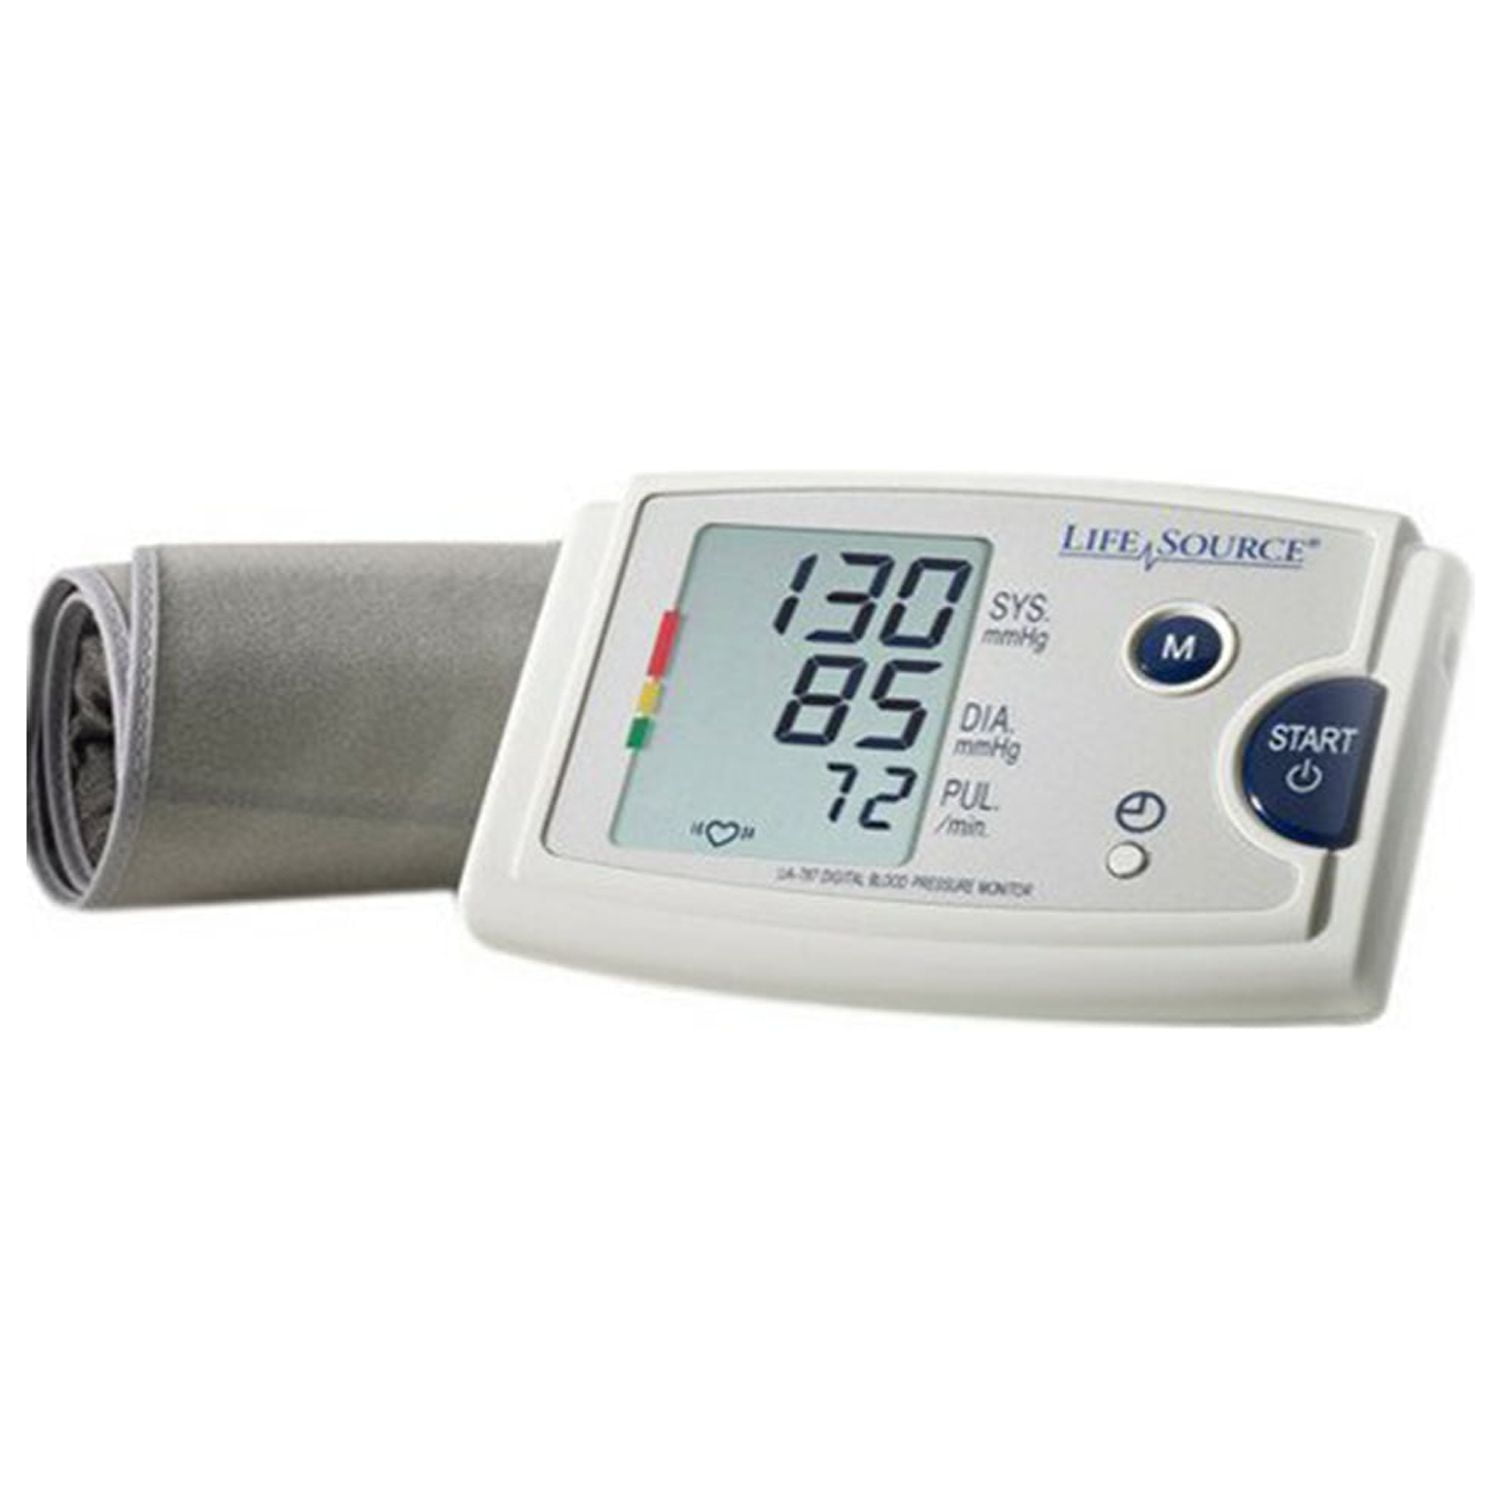 Automatic blood pressure monitor - HL858A1 - HEALTH & LIFE - arm / wireless  / with rechargeable battery